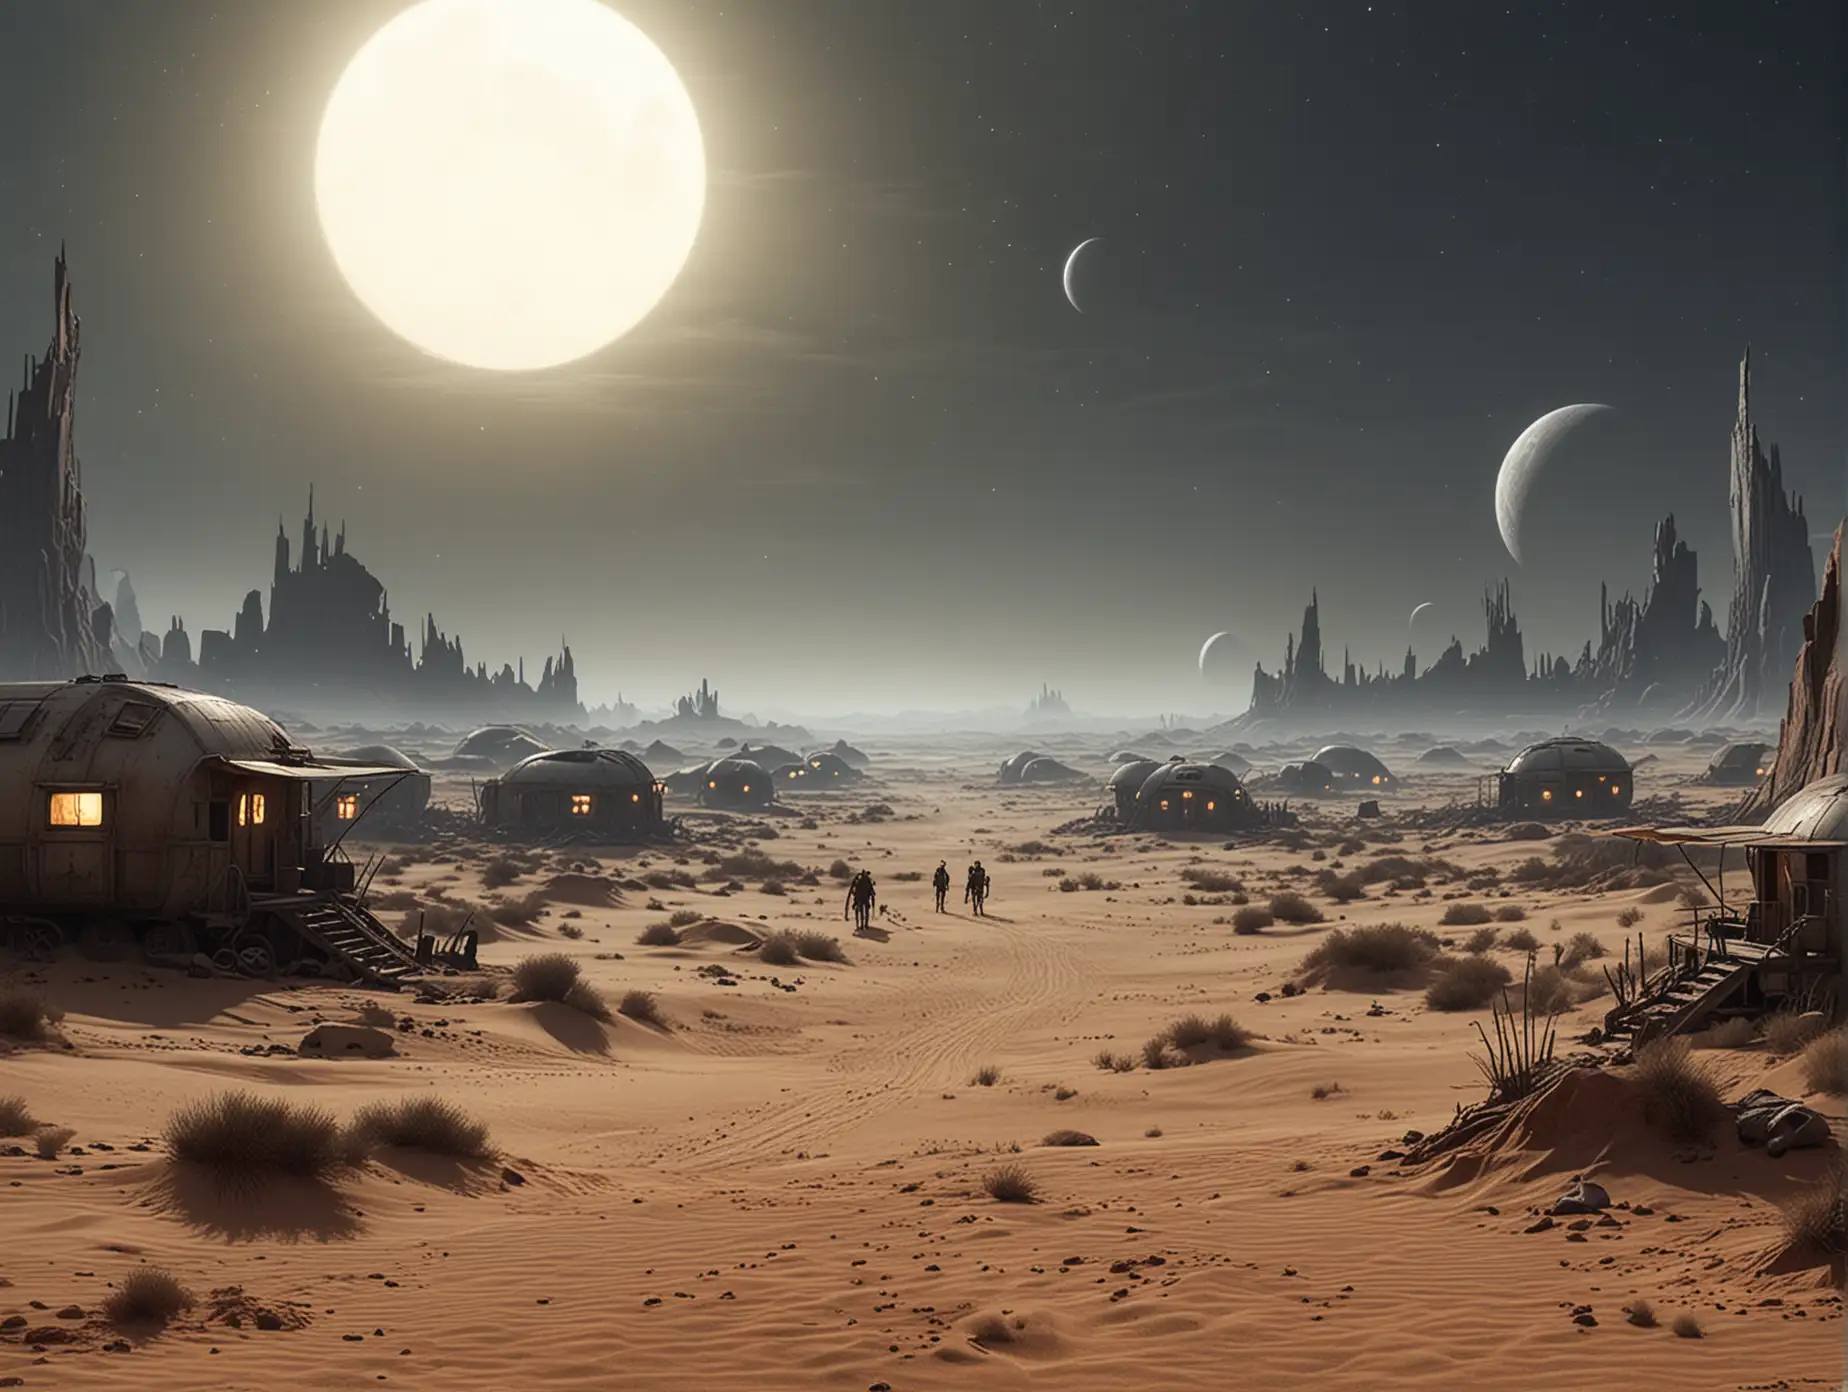 another world view like dune night with 2 moon. post apocalyptic settlement in back . caravan moving city